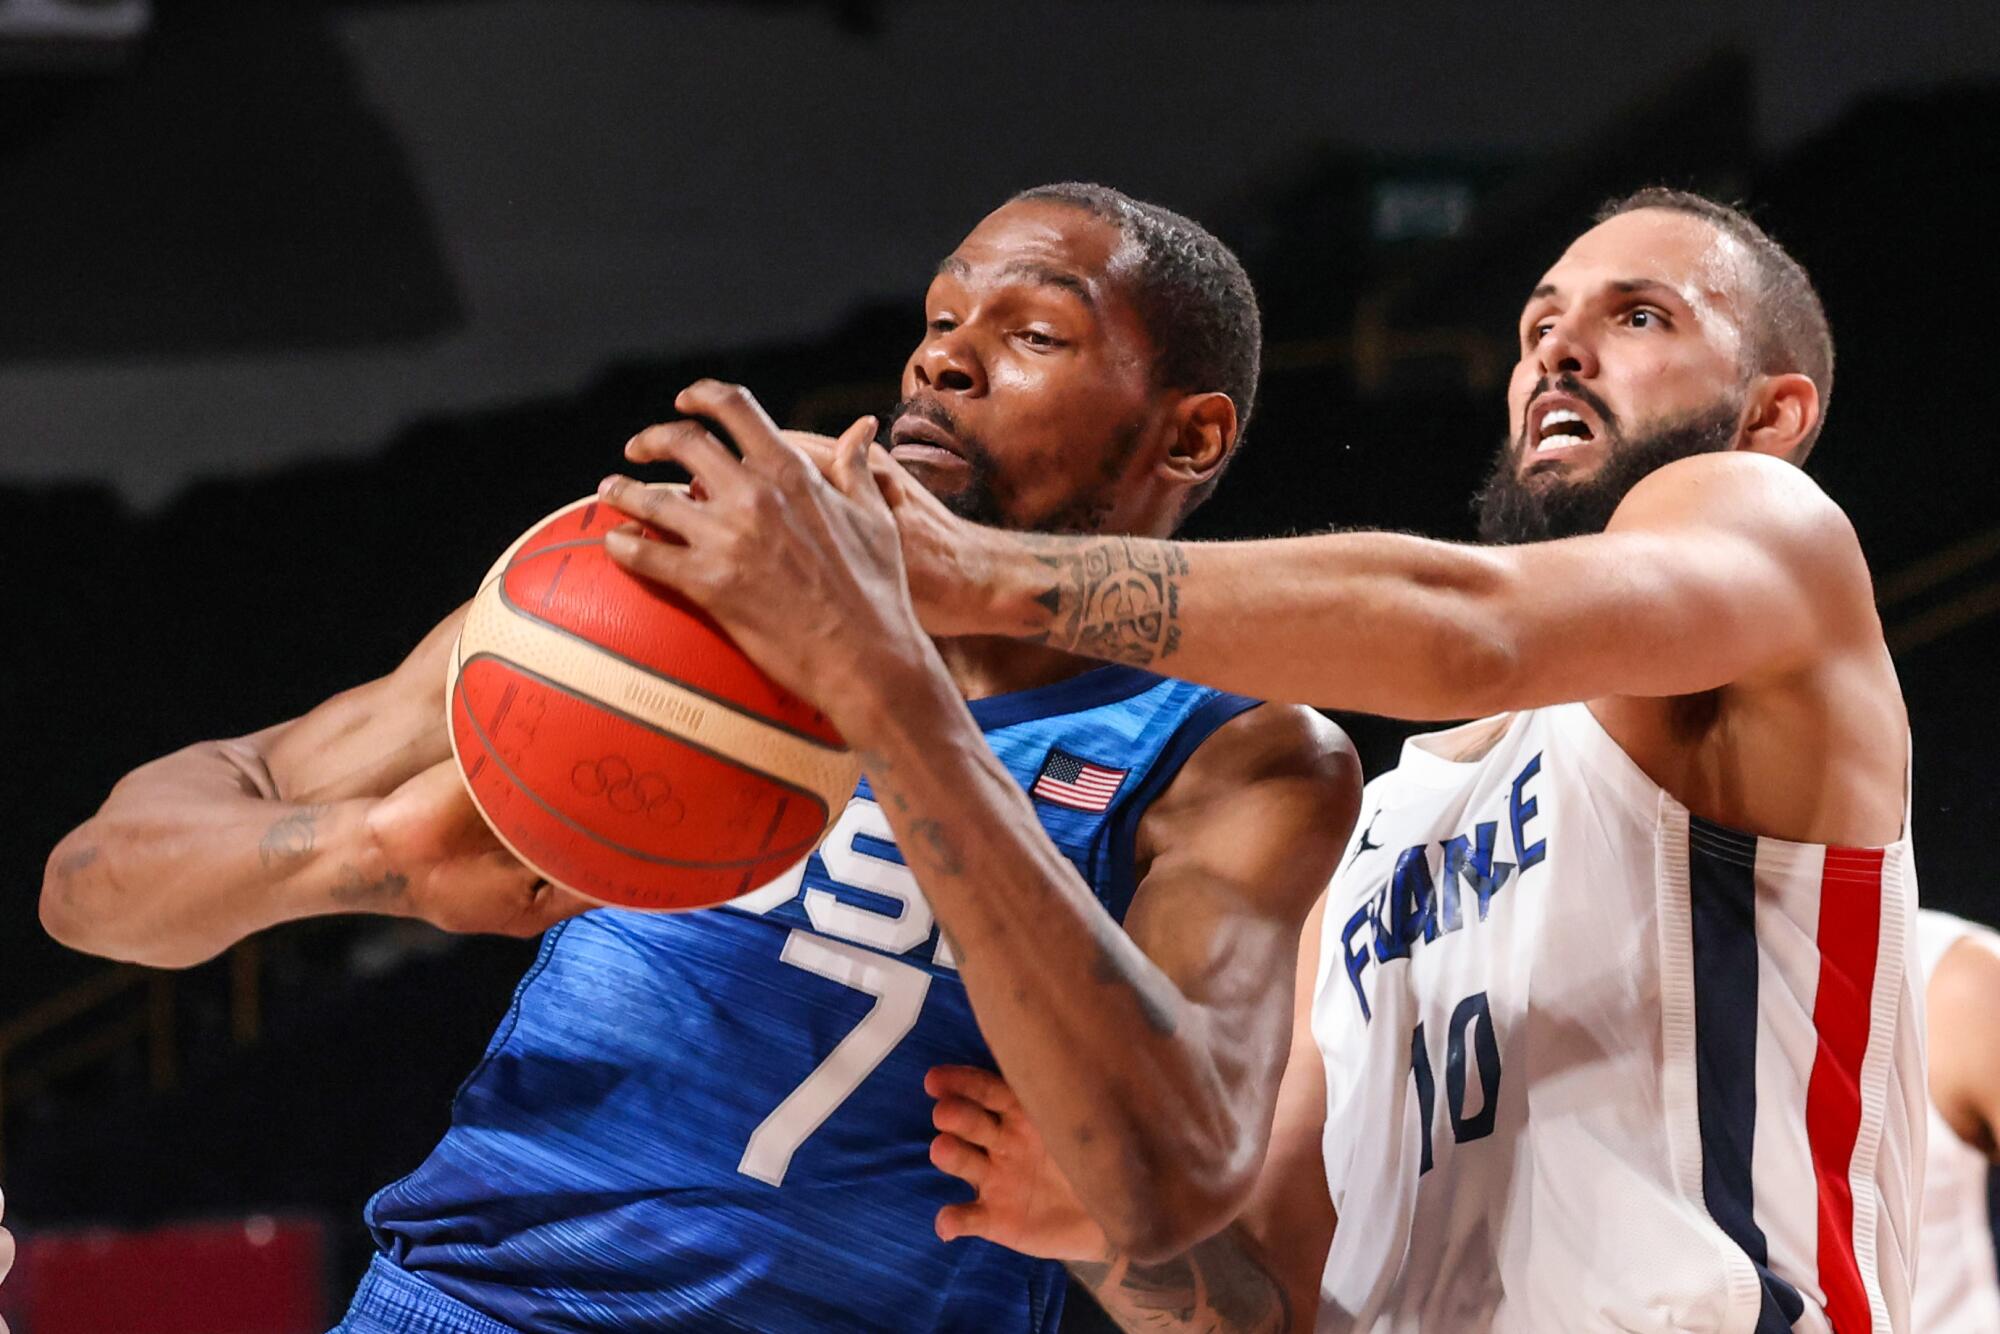 Team France shooting guard Evan Fournier knocks the ball from Team United States forward Kevin Durant